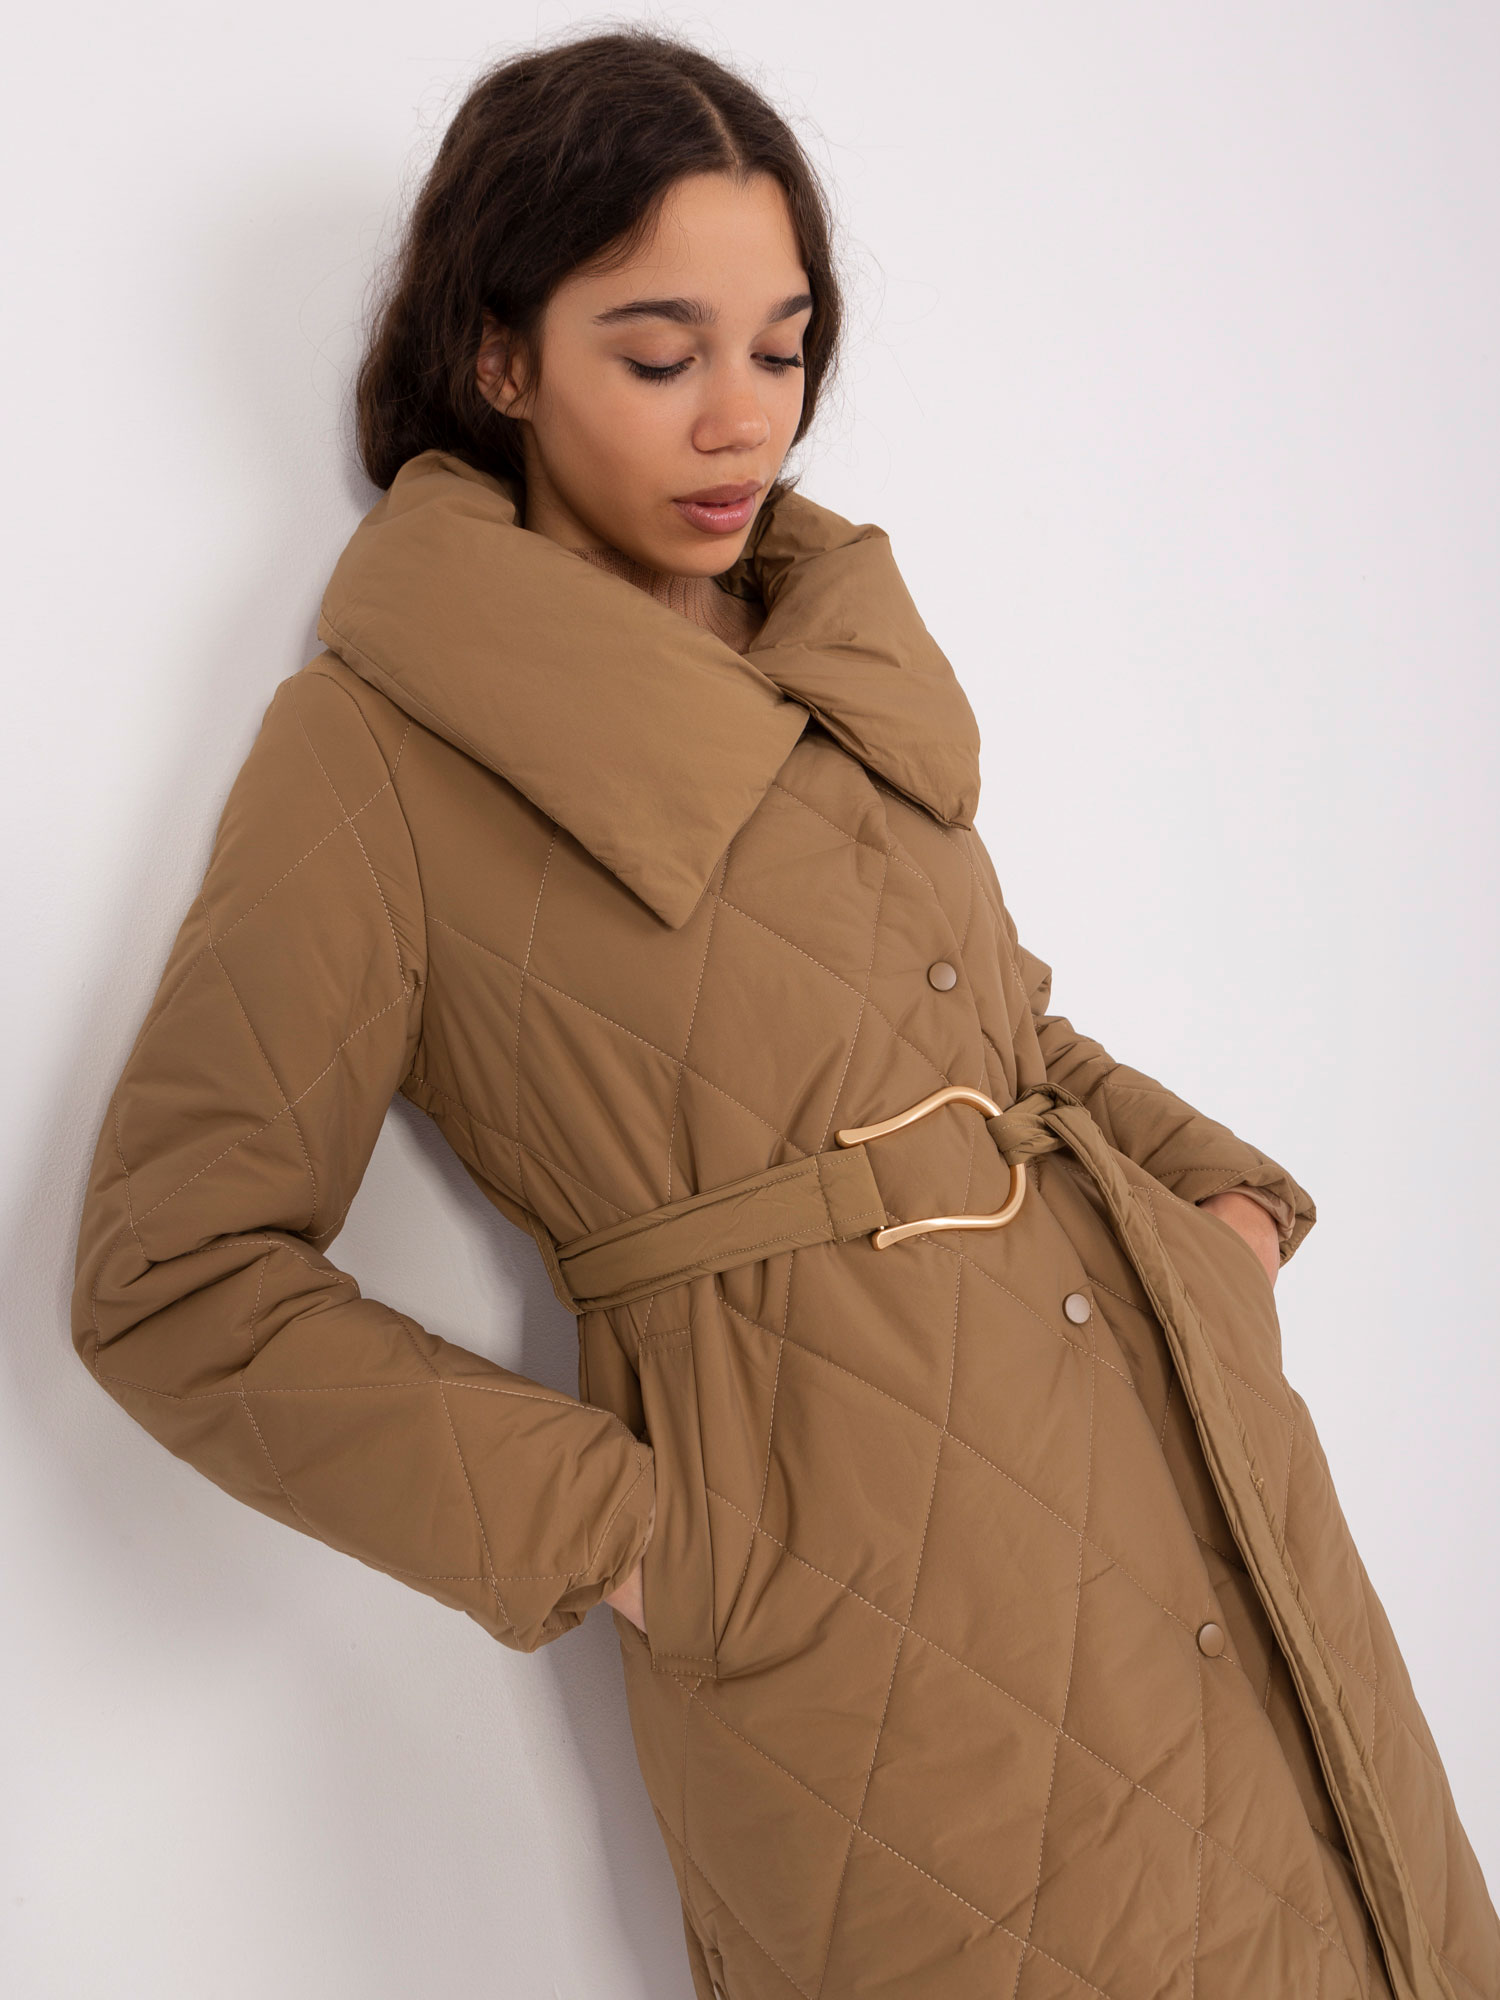 Coats or jackets for autumn?